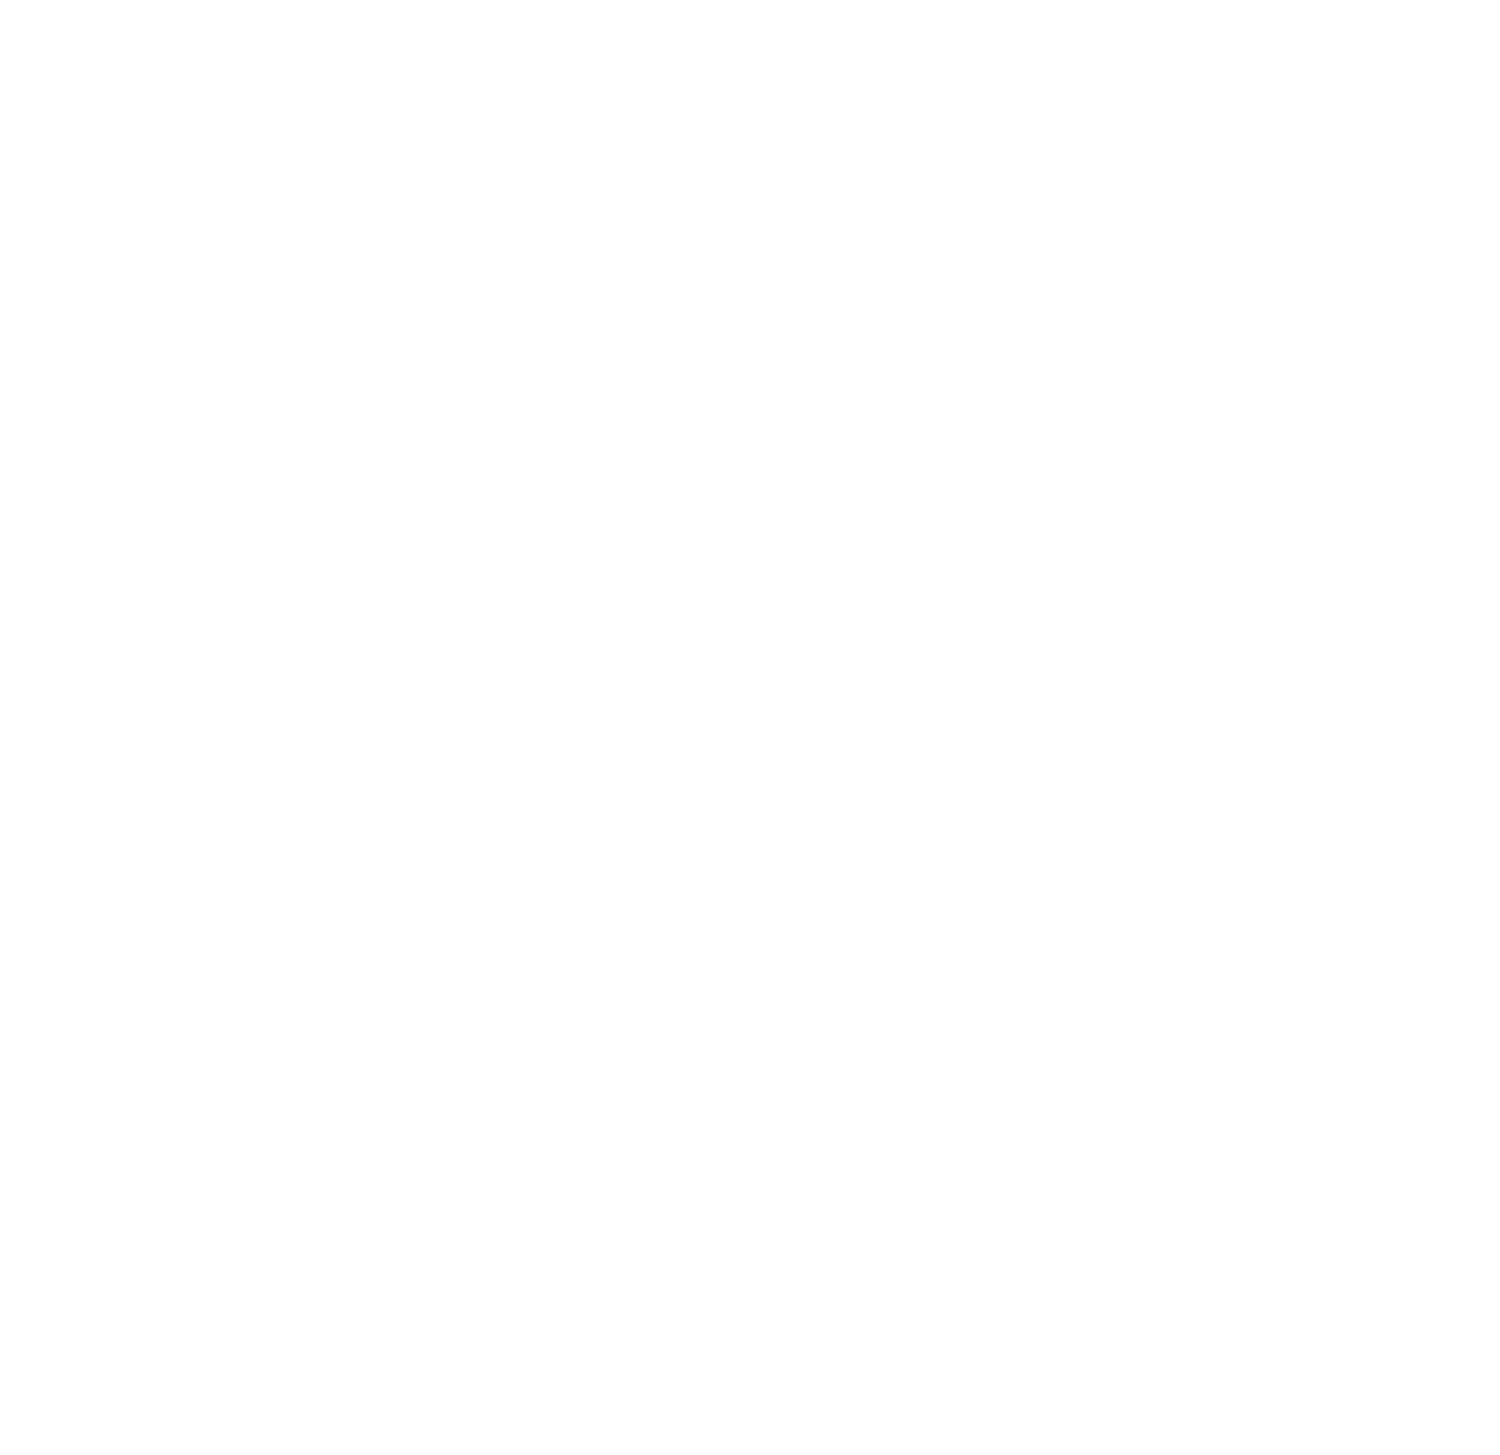 THE WELLBEING COLLECTIVE